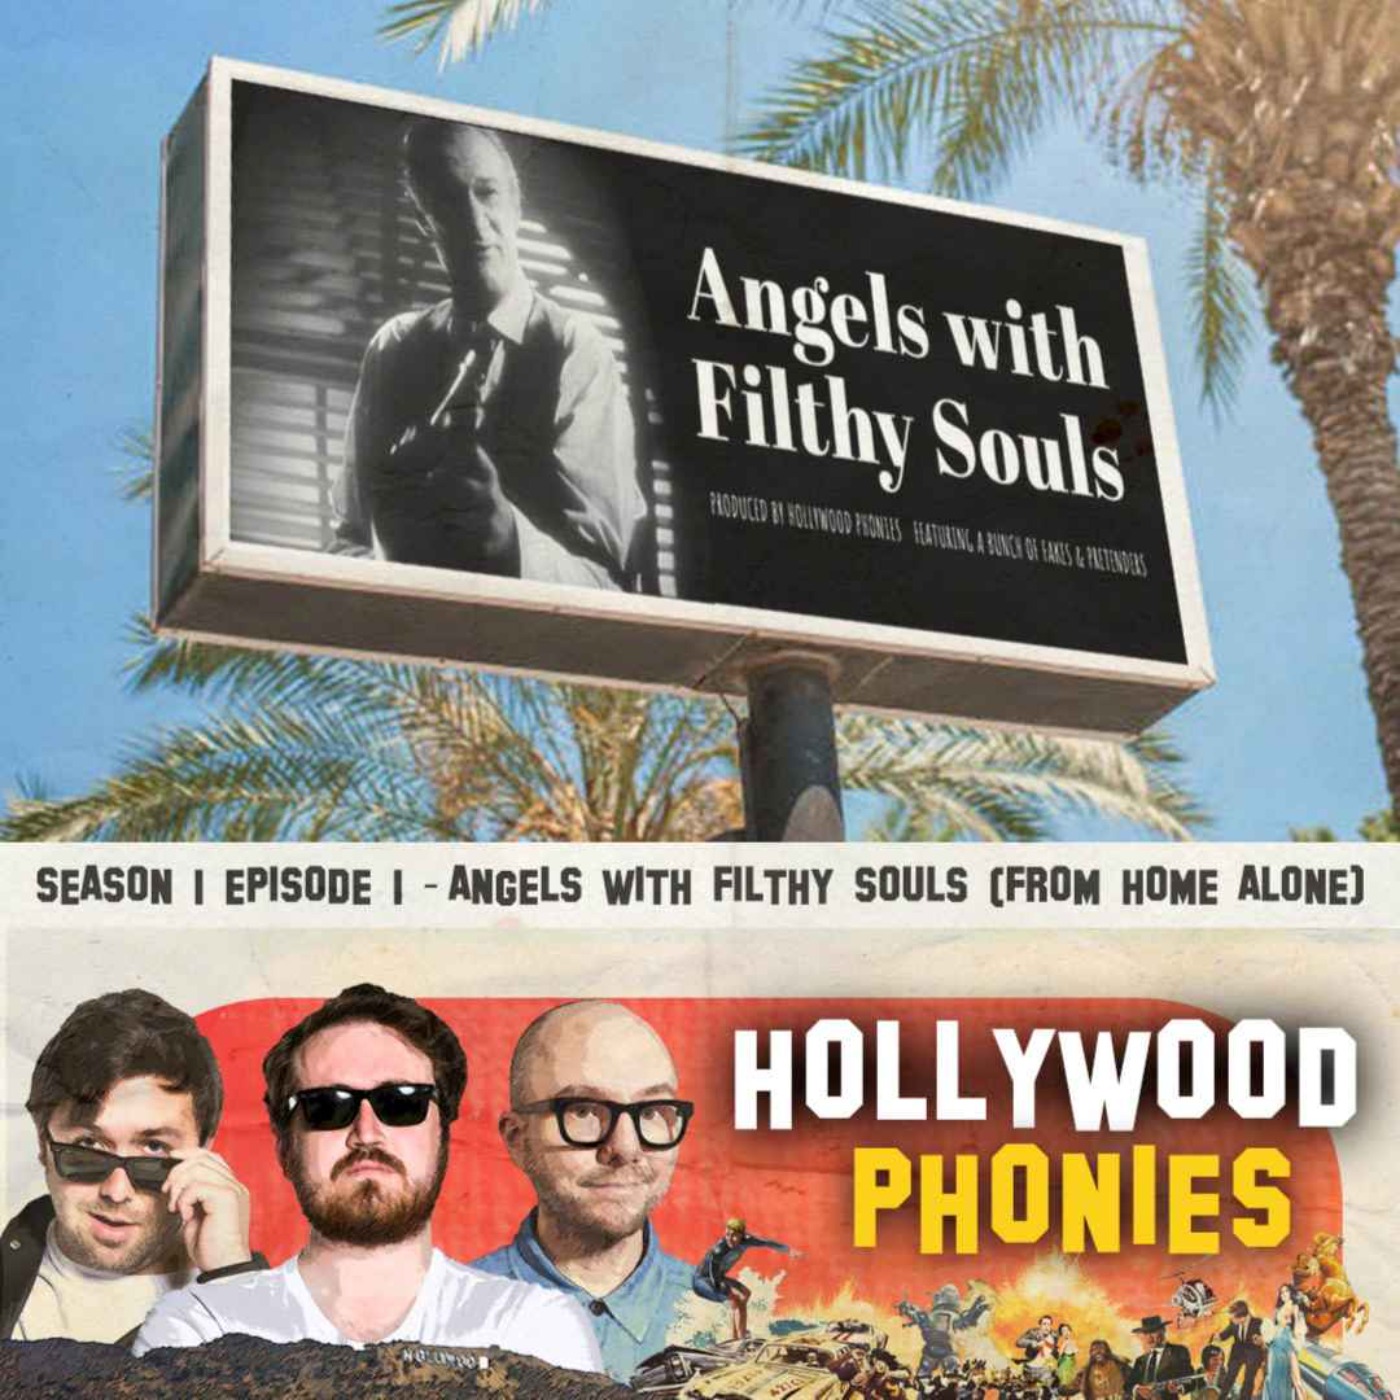 ’Angels with Filthy Souls’ (from ’Home Alone’)